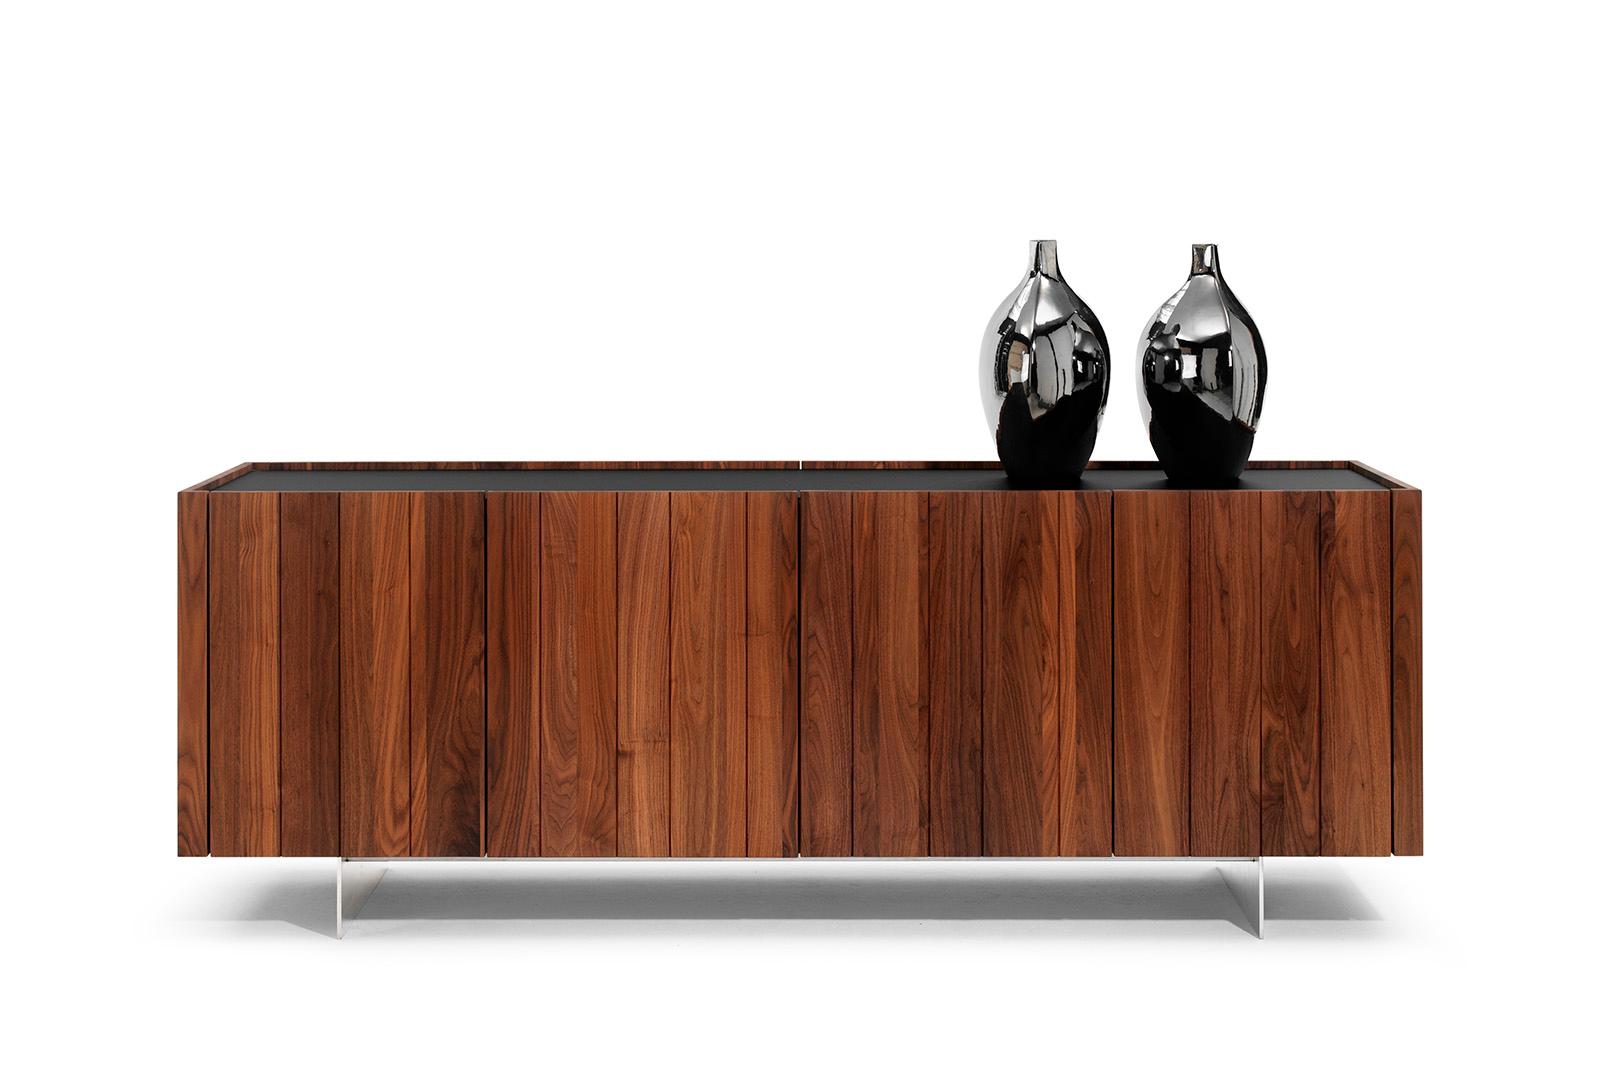 This beautiful sideboard in solid oiled walnut is an enrichment for any interior and a future heirloom. The version shown is 240cm wide, 80cm high, 50cm deep and has 4 doors. Due to the beautiful vertical accents, the transitions of the doors do not